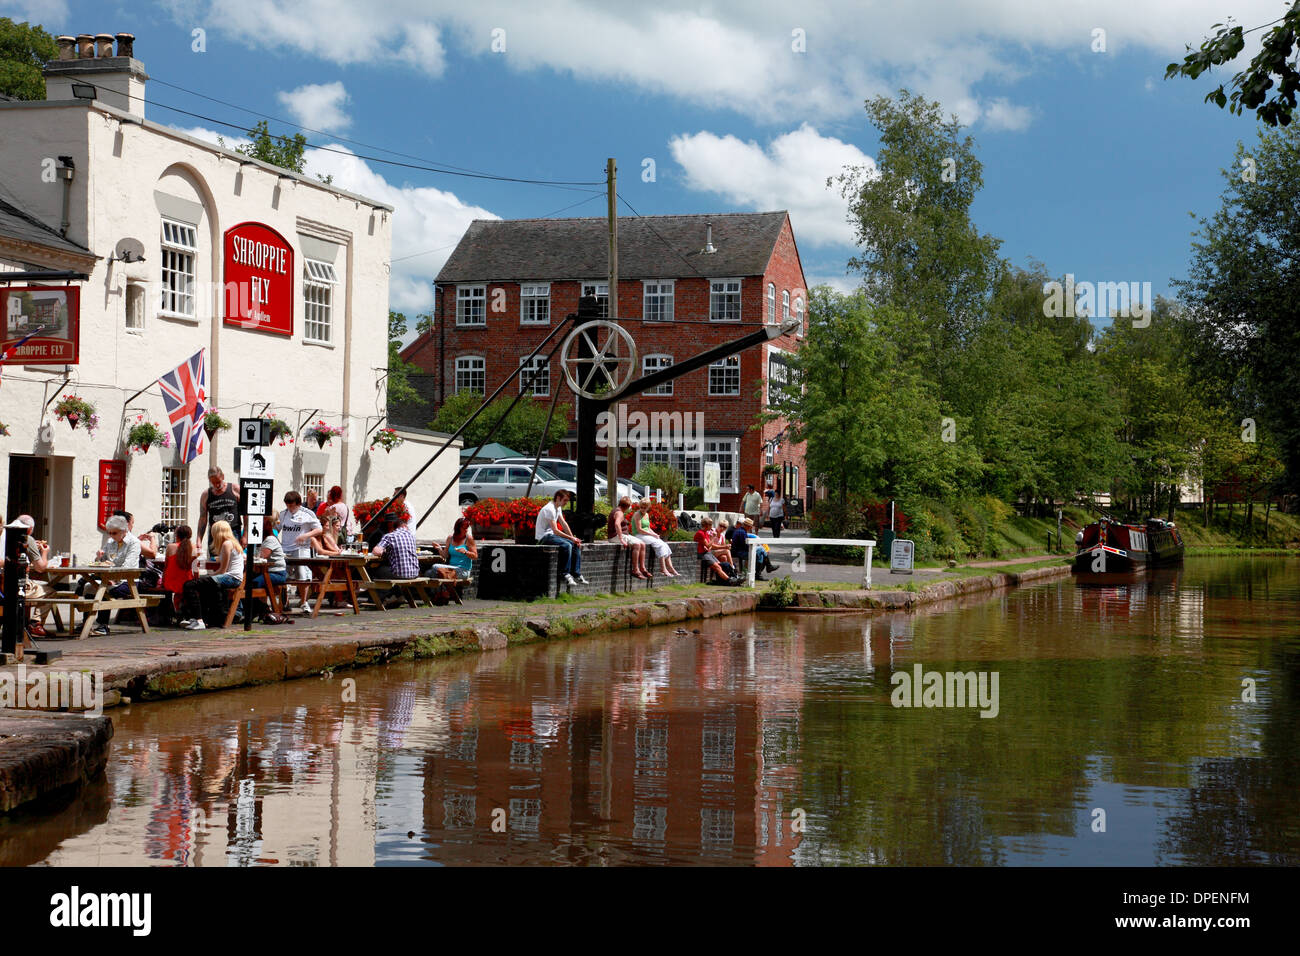 The Shroppie Fly pub and Audlem mill by the Shropshire Union Canal in the village of Audlem Stock Photo